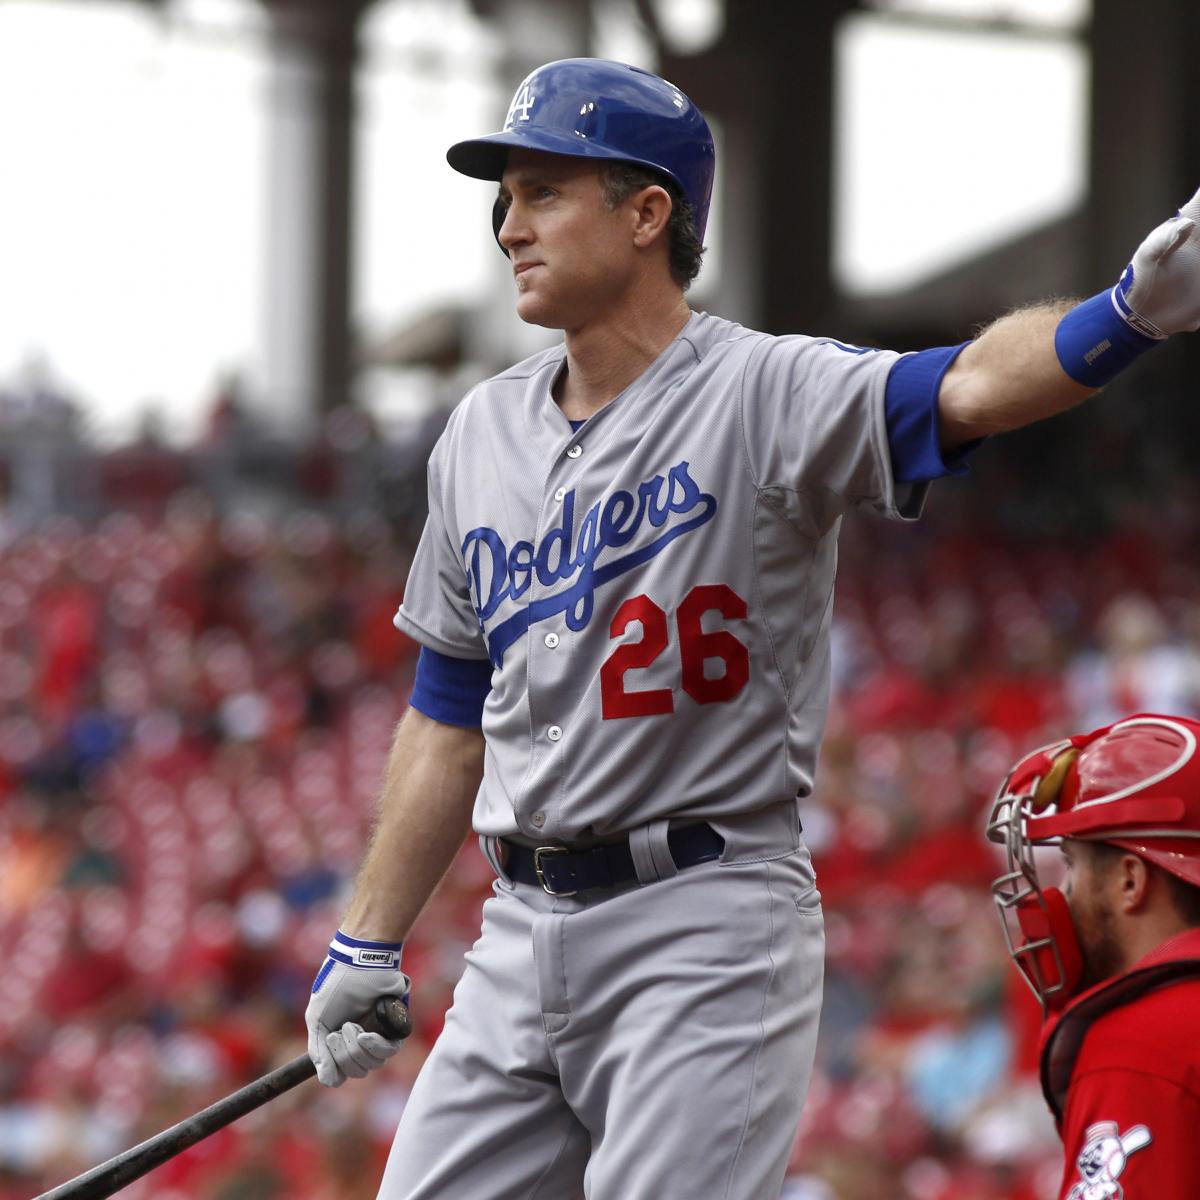 Does anyone want Chase Utley or Angel Pagan? - Beyond the Box Score